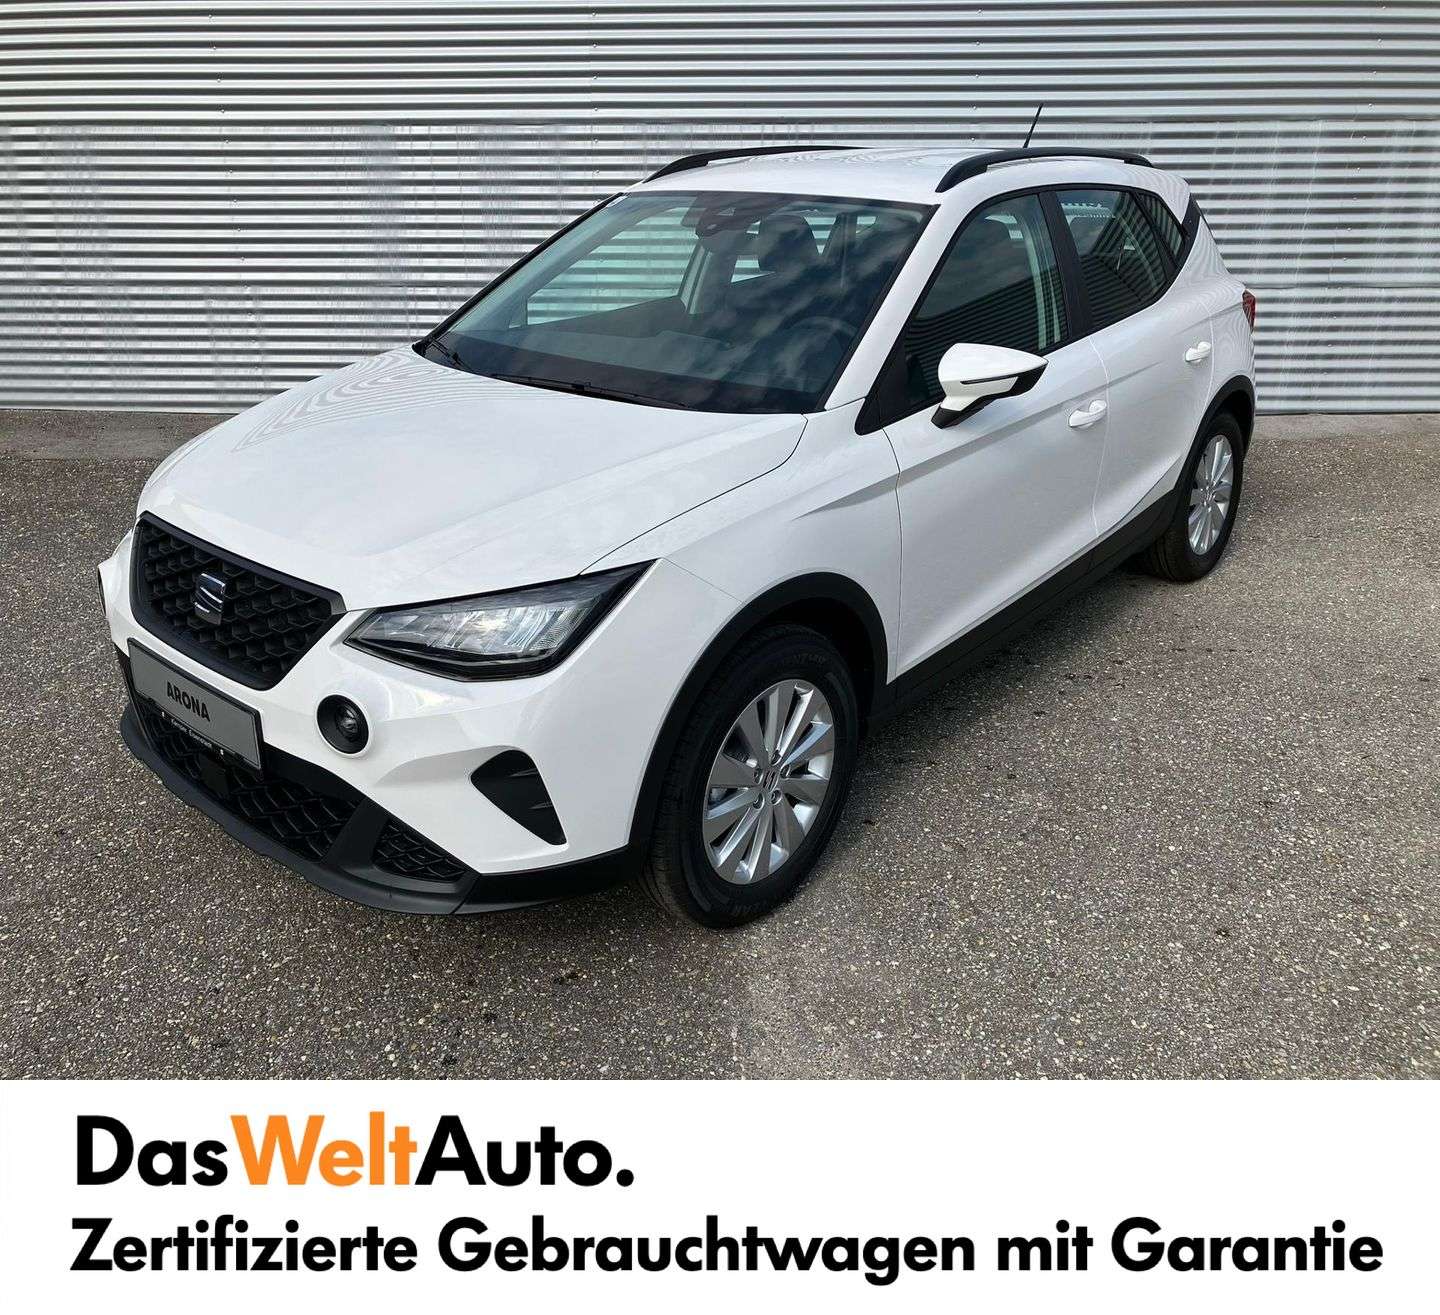 SEAT Arona Off-Road/Pick-up in White used in Eisenstadt for € 18,990.-